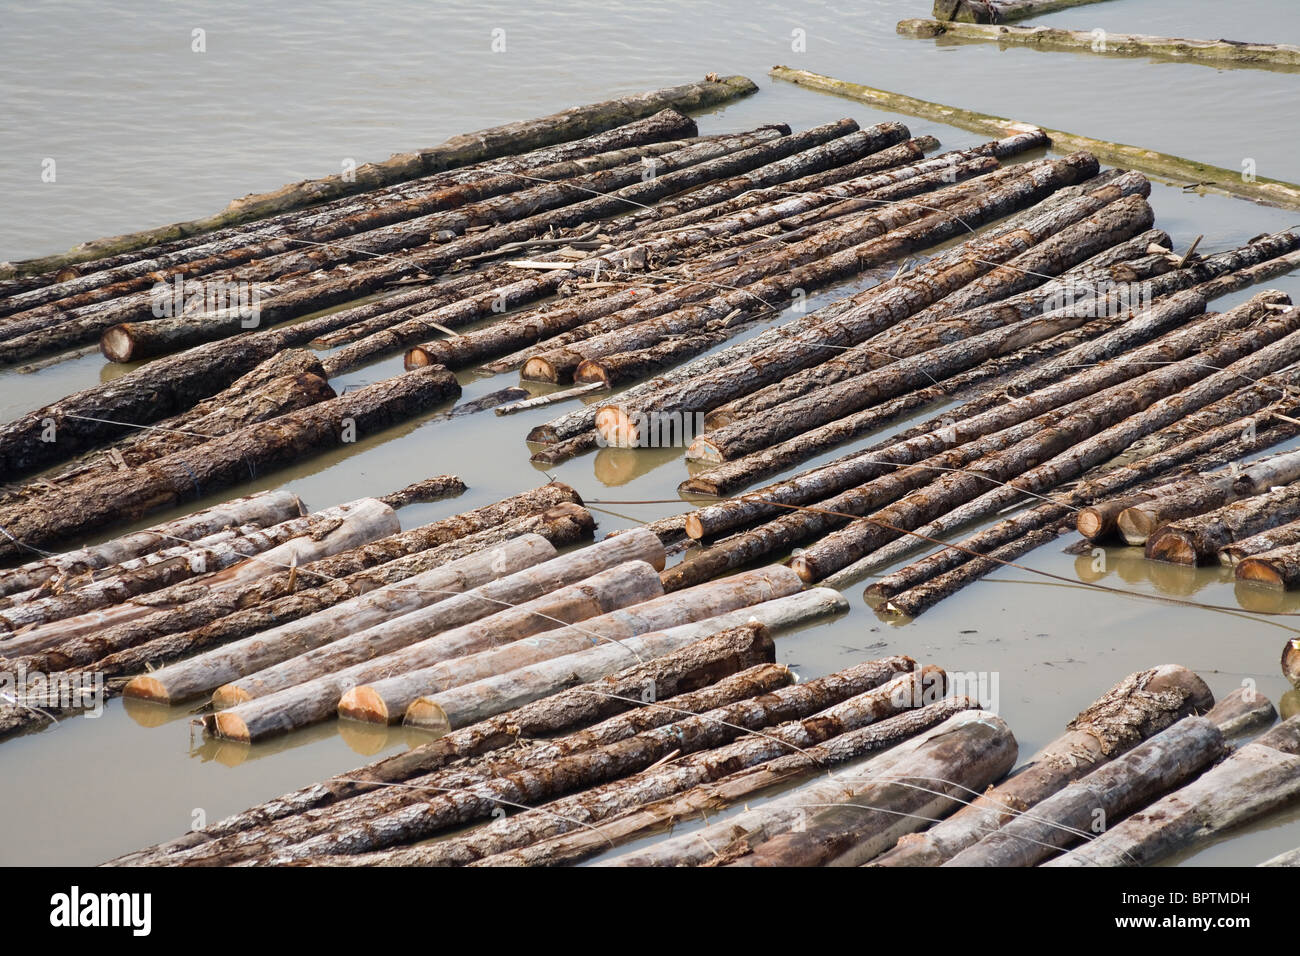 Log and Lumber Floating On Water Stock Photo